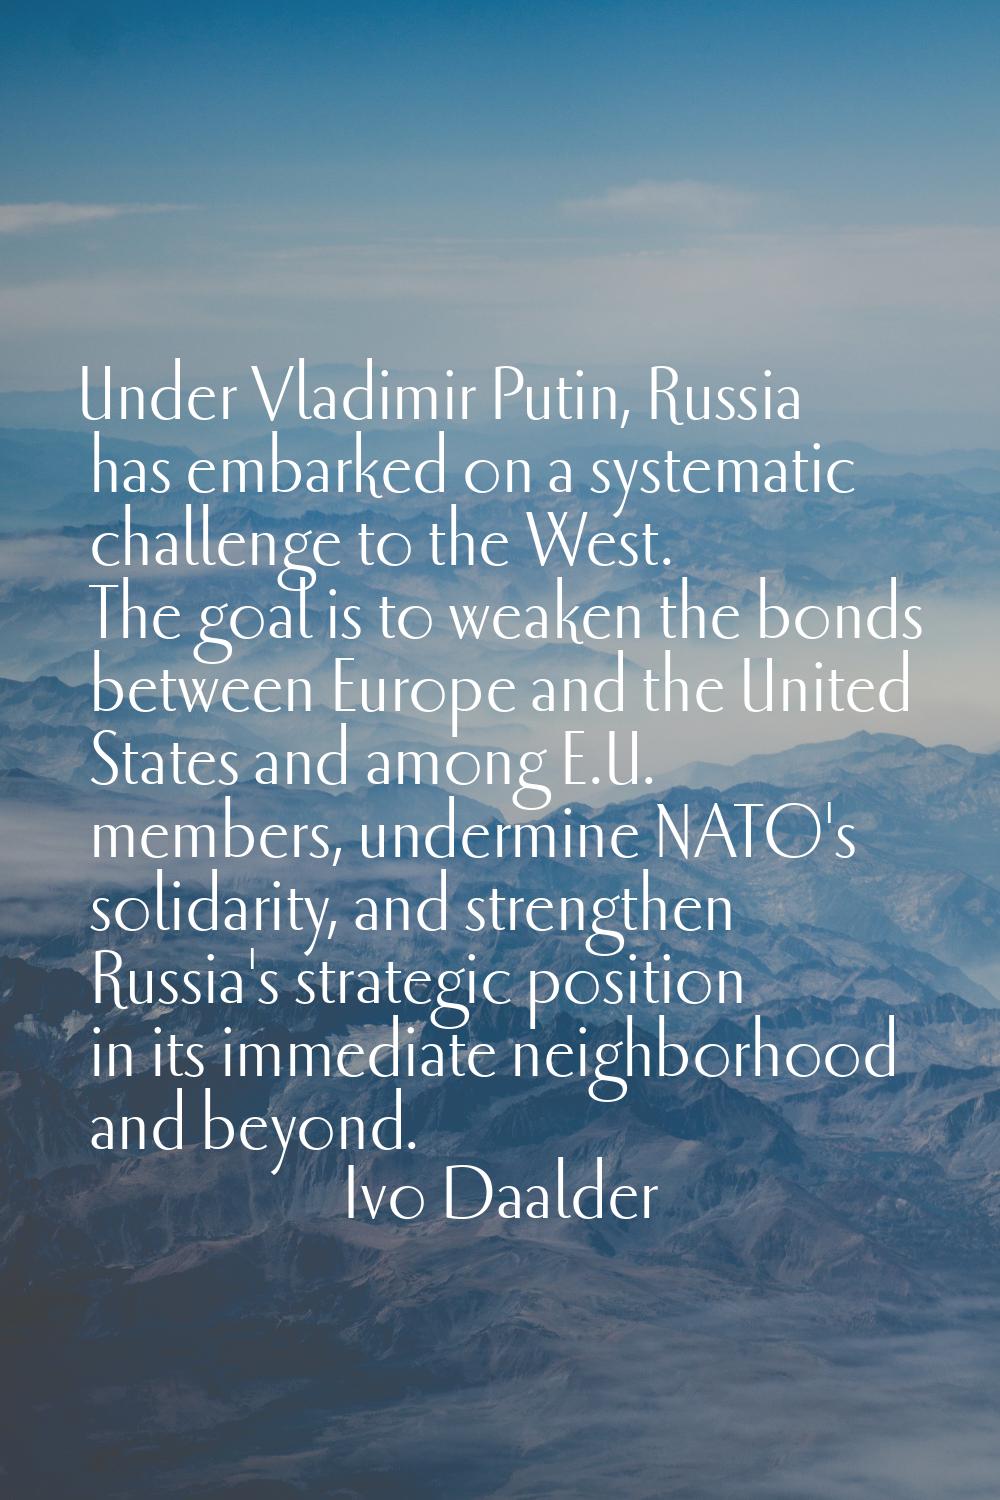 Under Vladimir Putin, Russia has embarked on a systematic challenge to the West. The goal is to wea